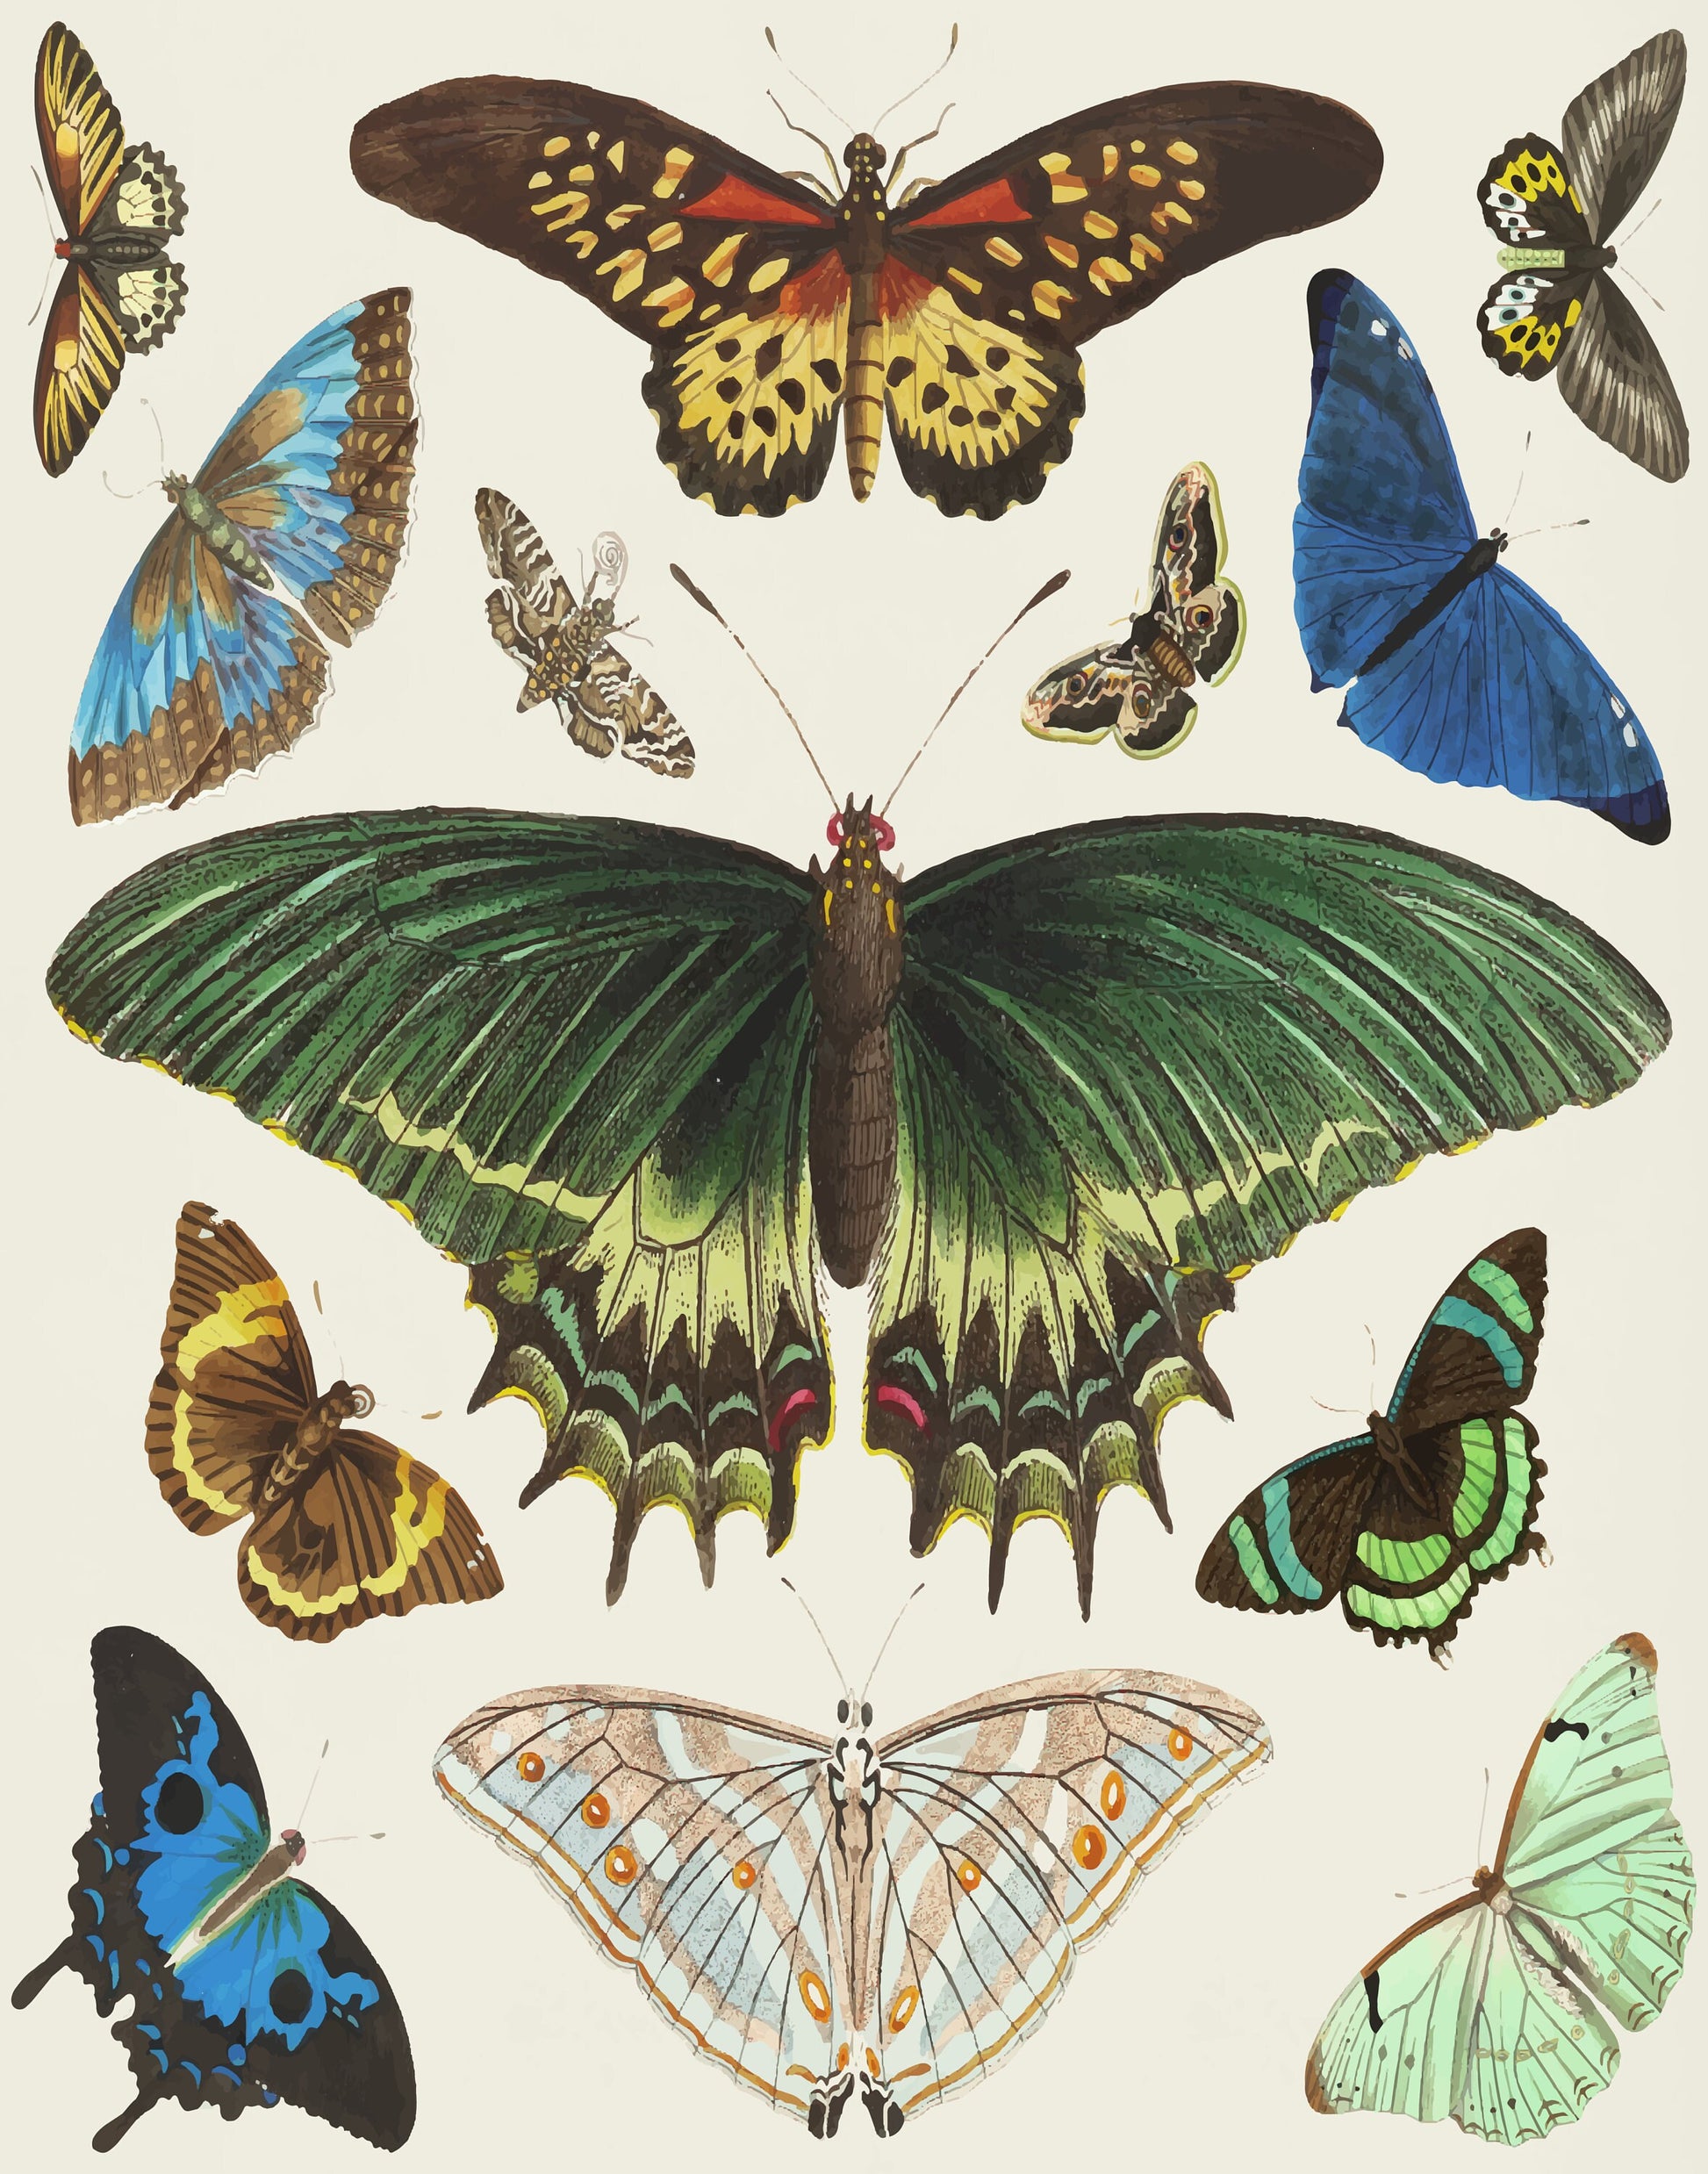 Vintage Butterfly Art DIGITAL PRINT, Trendy Download, French Insect Chart, Butterfly Illustration Wall Art, Biology Poster, Vintage decor